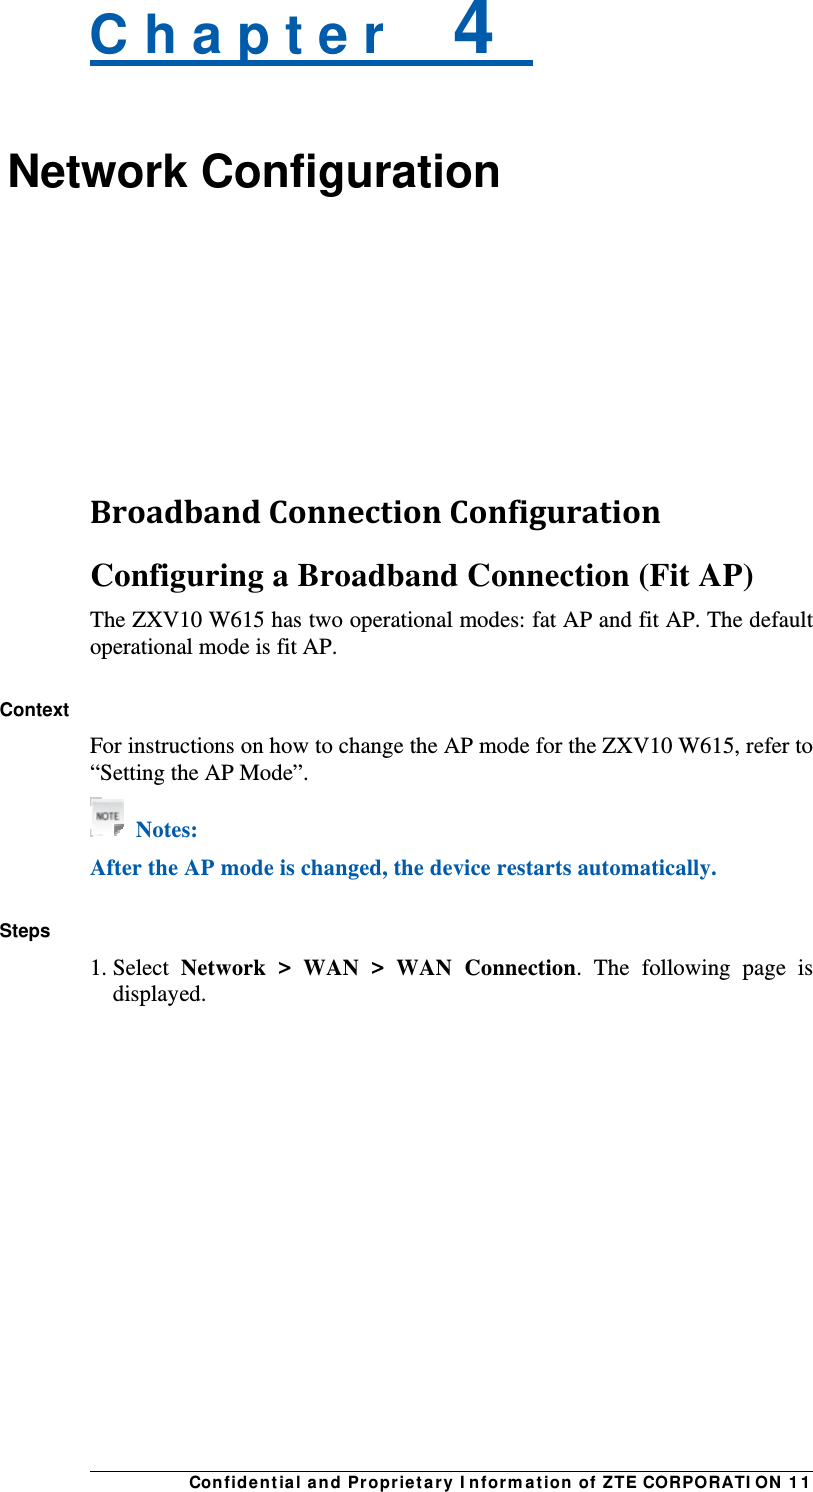 Con fidentia l and Propriet a ry I nform a t ion of ZTE CORPORATI ON  1 1 C h a p t e r    4   Network Configuration    BroadbandConnectionConfigurationConfiguring a Broadband Connection (Fit AP) The ZXV10 W615 has two operational modes: fat AP and fit AP. The default operational mode is fit AP.  Context For instructions on how to change the AP mode for the ZXV10 W615, refer to “Setting the AP Mode”.  Notes: After the AP mode is changed, the device restarts automatically.  Steps 1. Select  Network &gt; WAN &gt; WAN Connection. The following page is displayed. 